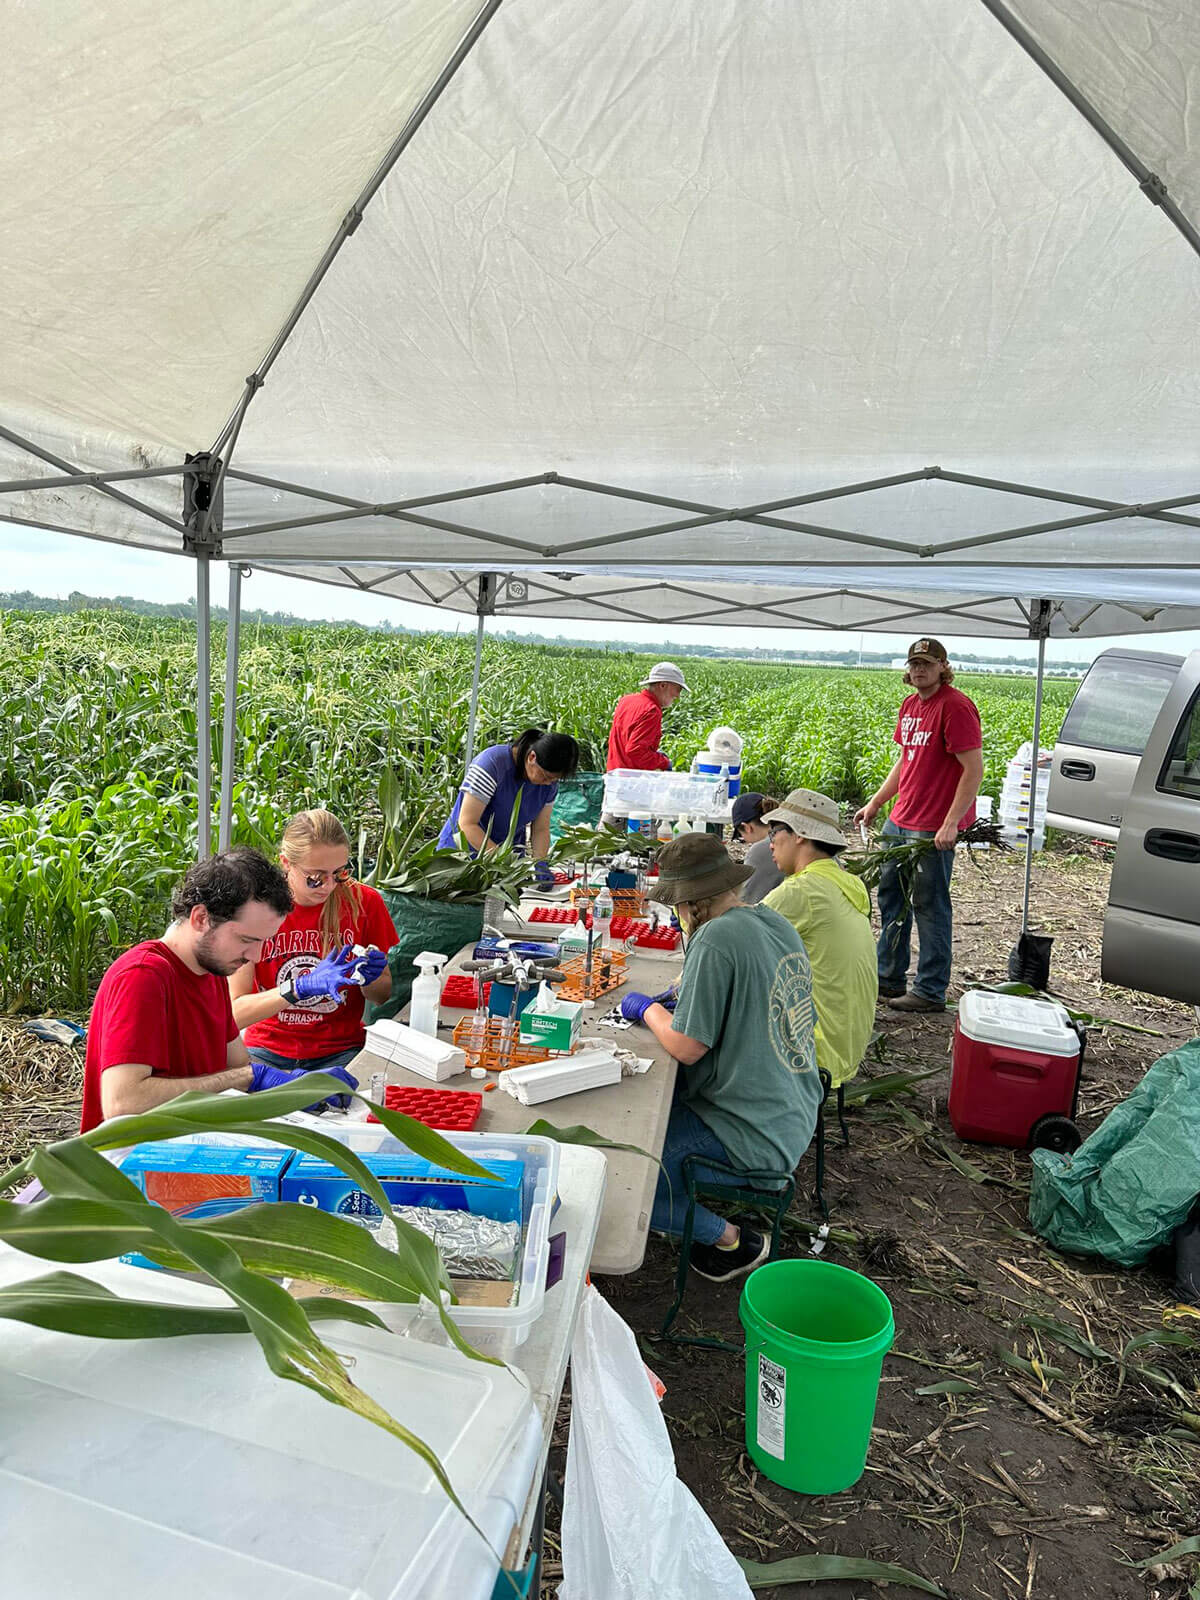 Fieldwork at UNL's Havelock Farm -- part of Dr. James Schnable and Dr. Jinliang Yang's DOE funded collaboration.